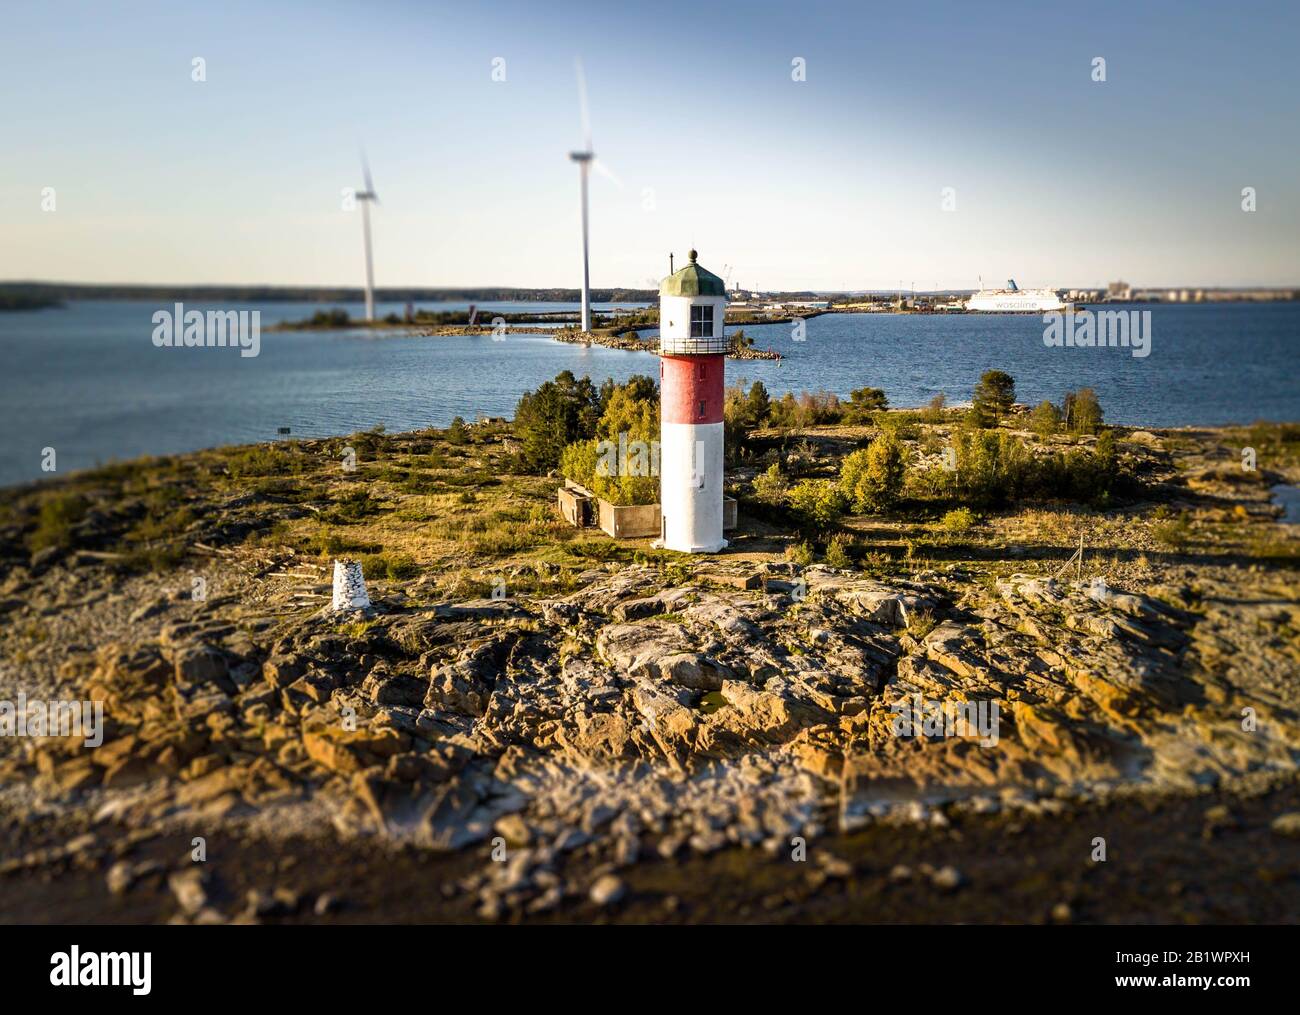 Aerial photo of beautiful white red striped sea beacon on stone island with two windmills behind, safe navigation and sea transport in baltic sea Stock Photo